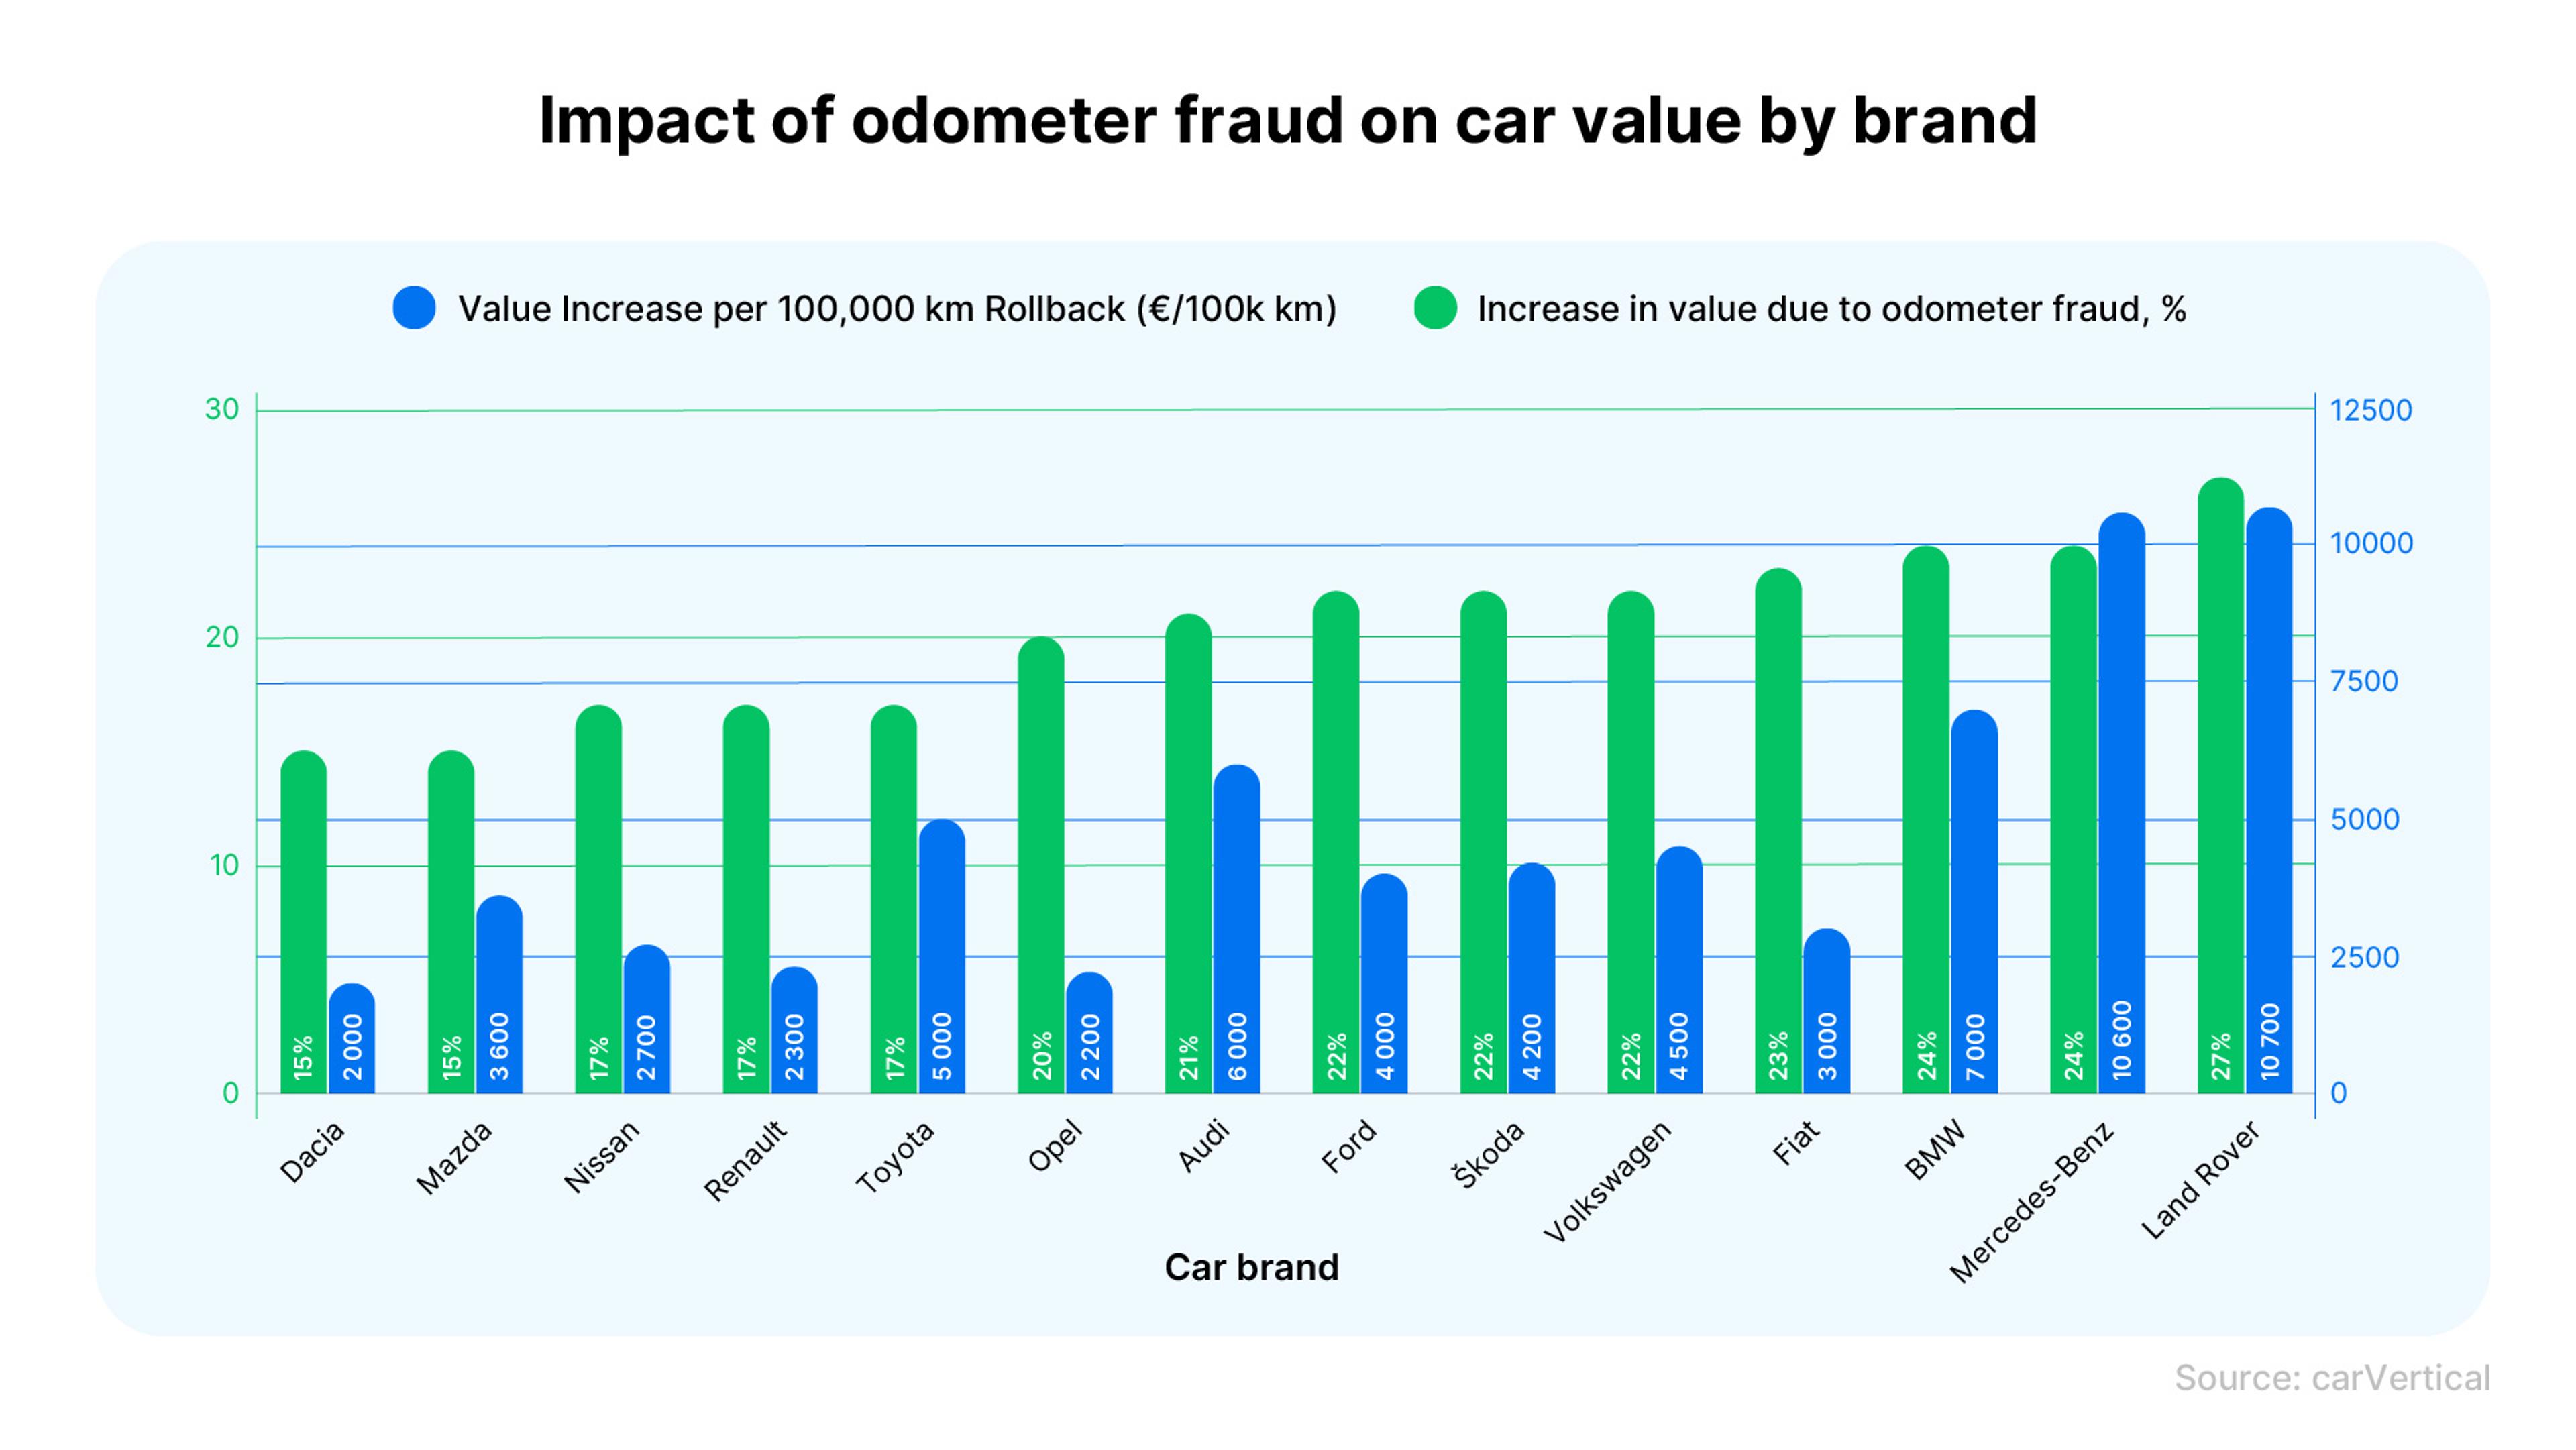 Impact of odometer fraud on car value by brand